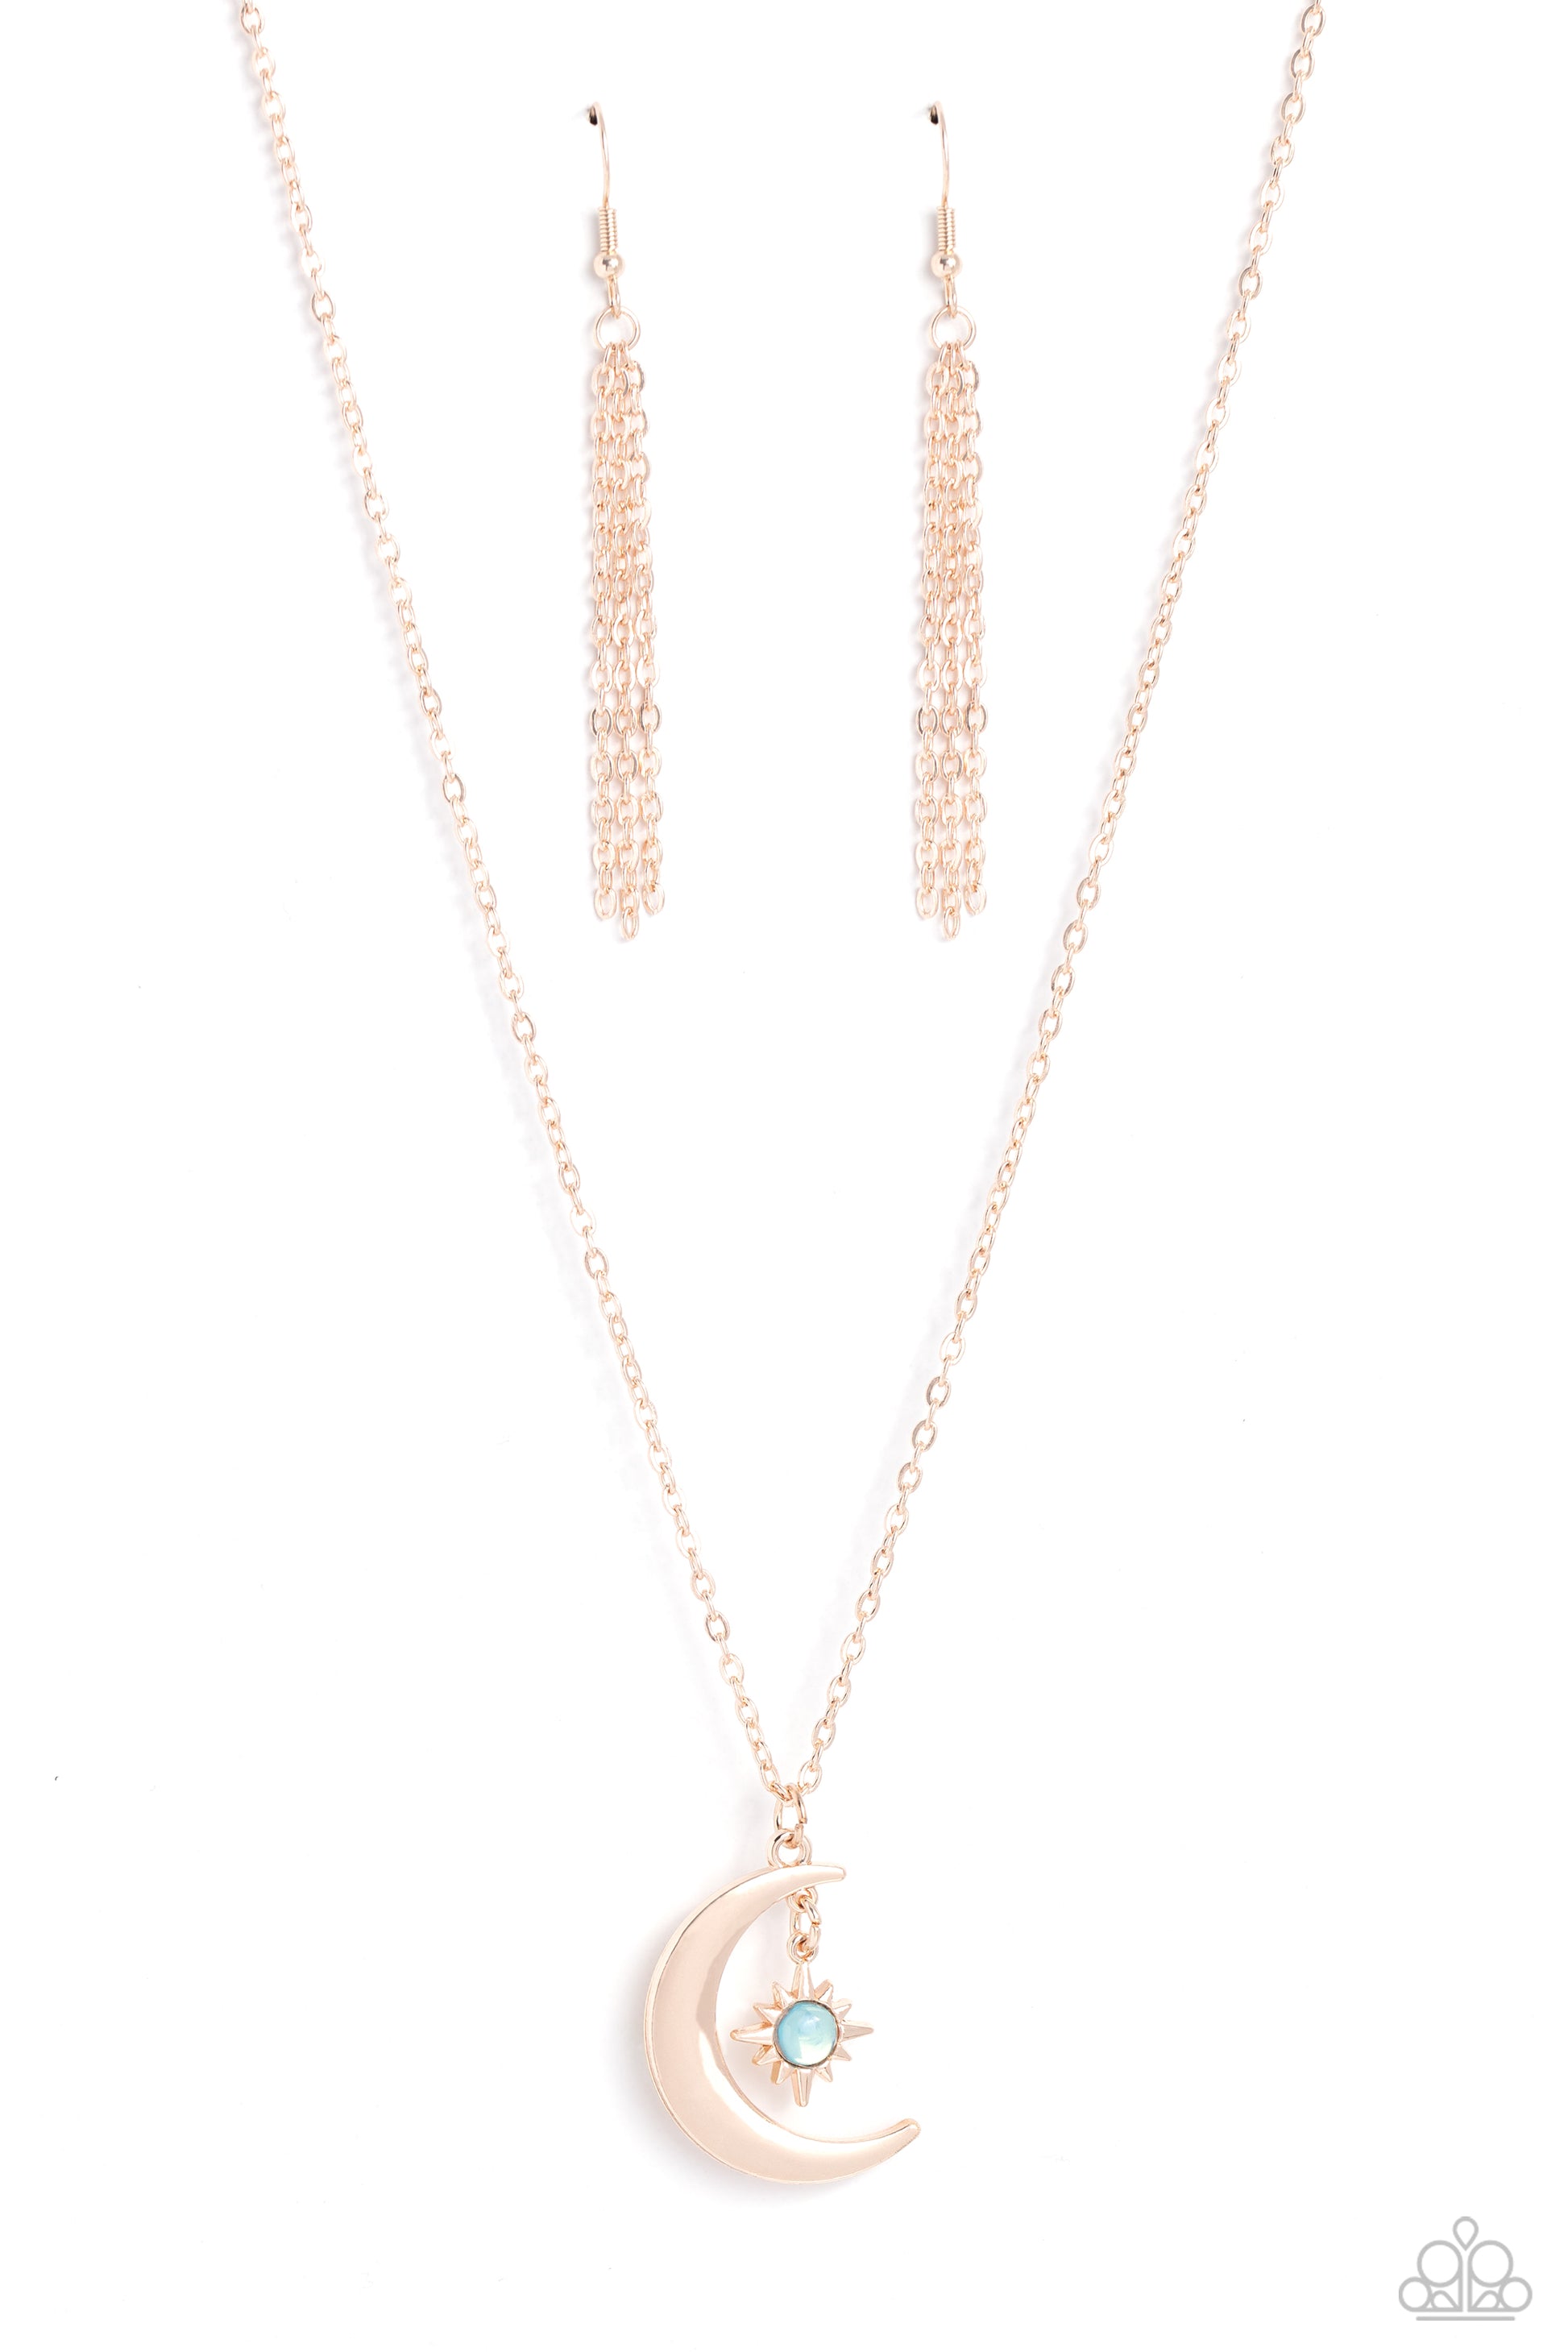 Stellar Sway Rose Gold Moon Necklace - Paparazzi Accessories